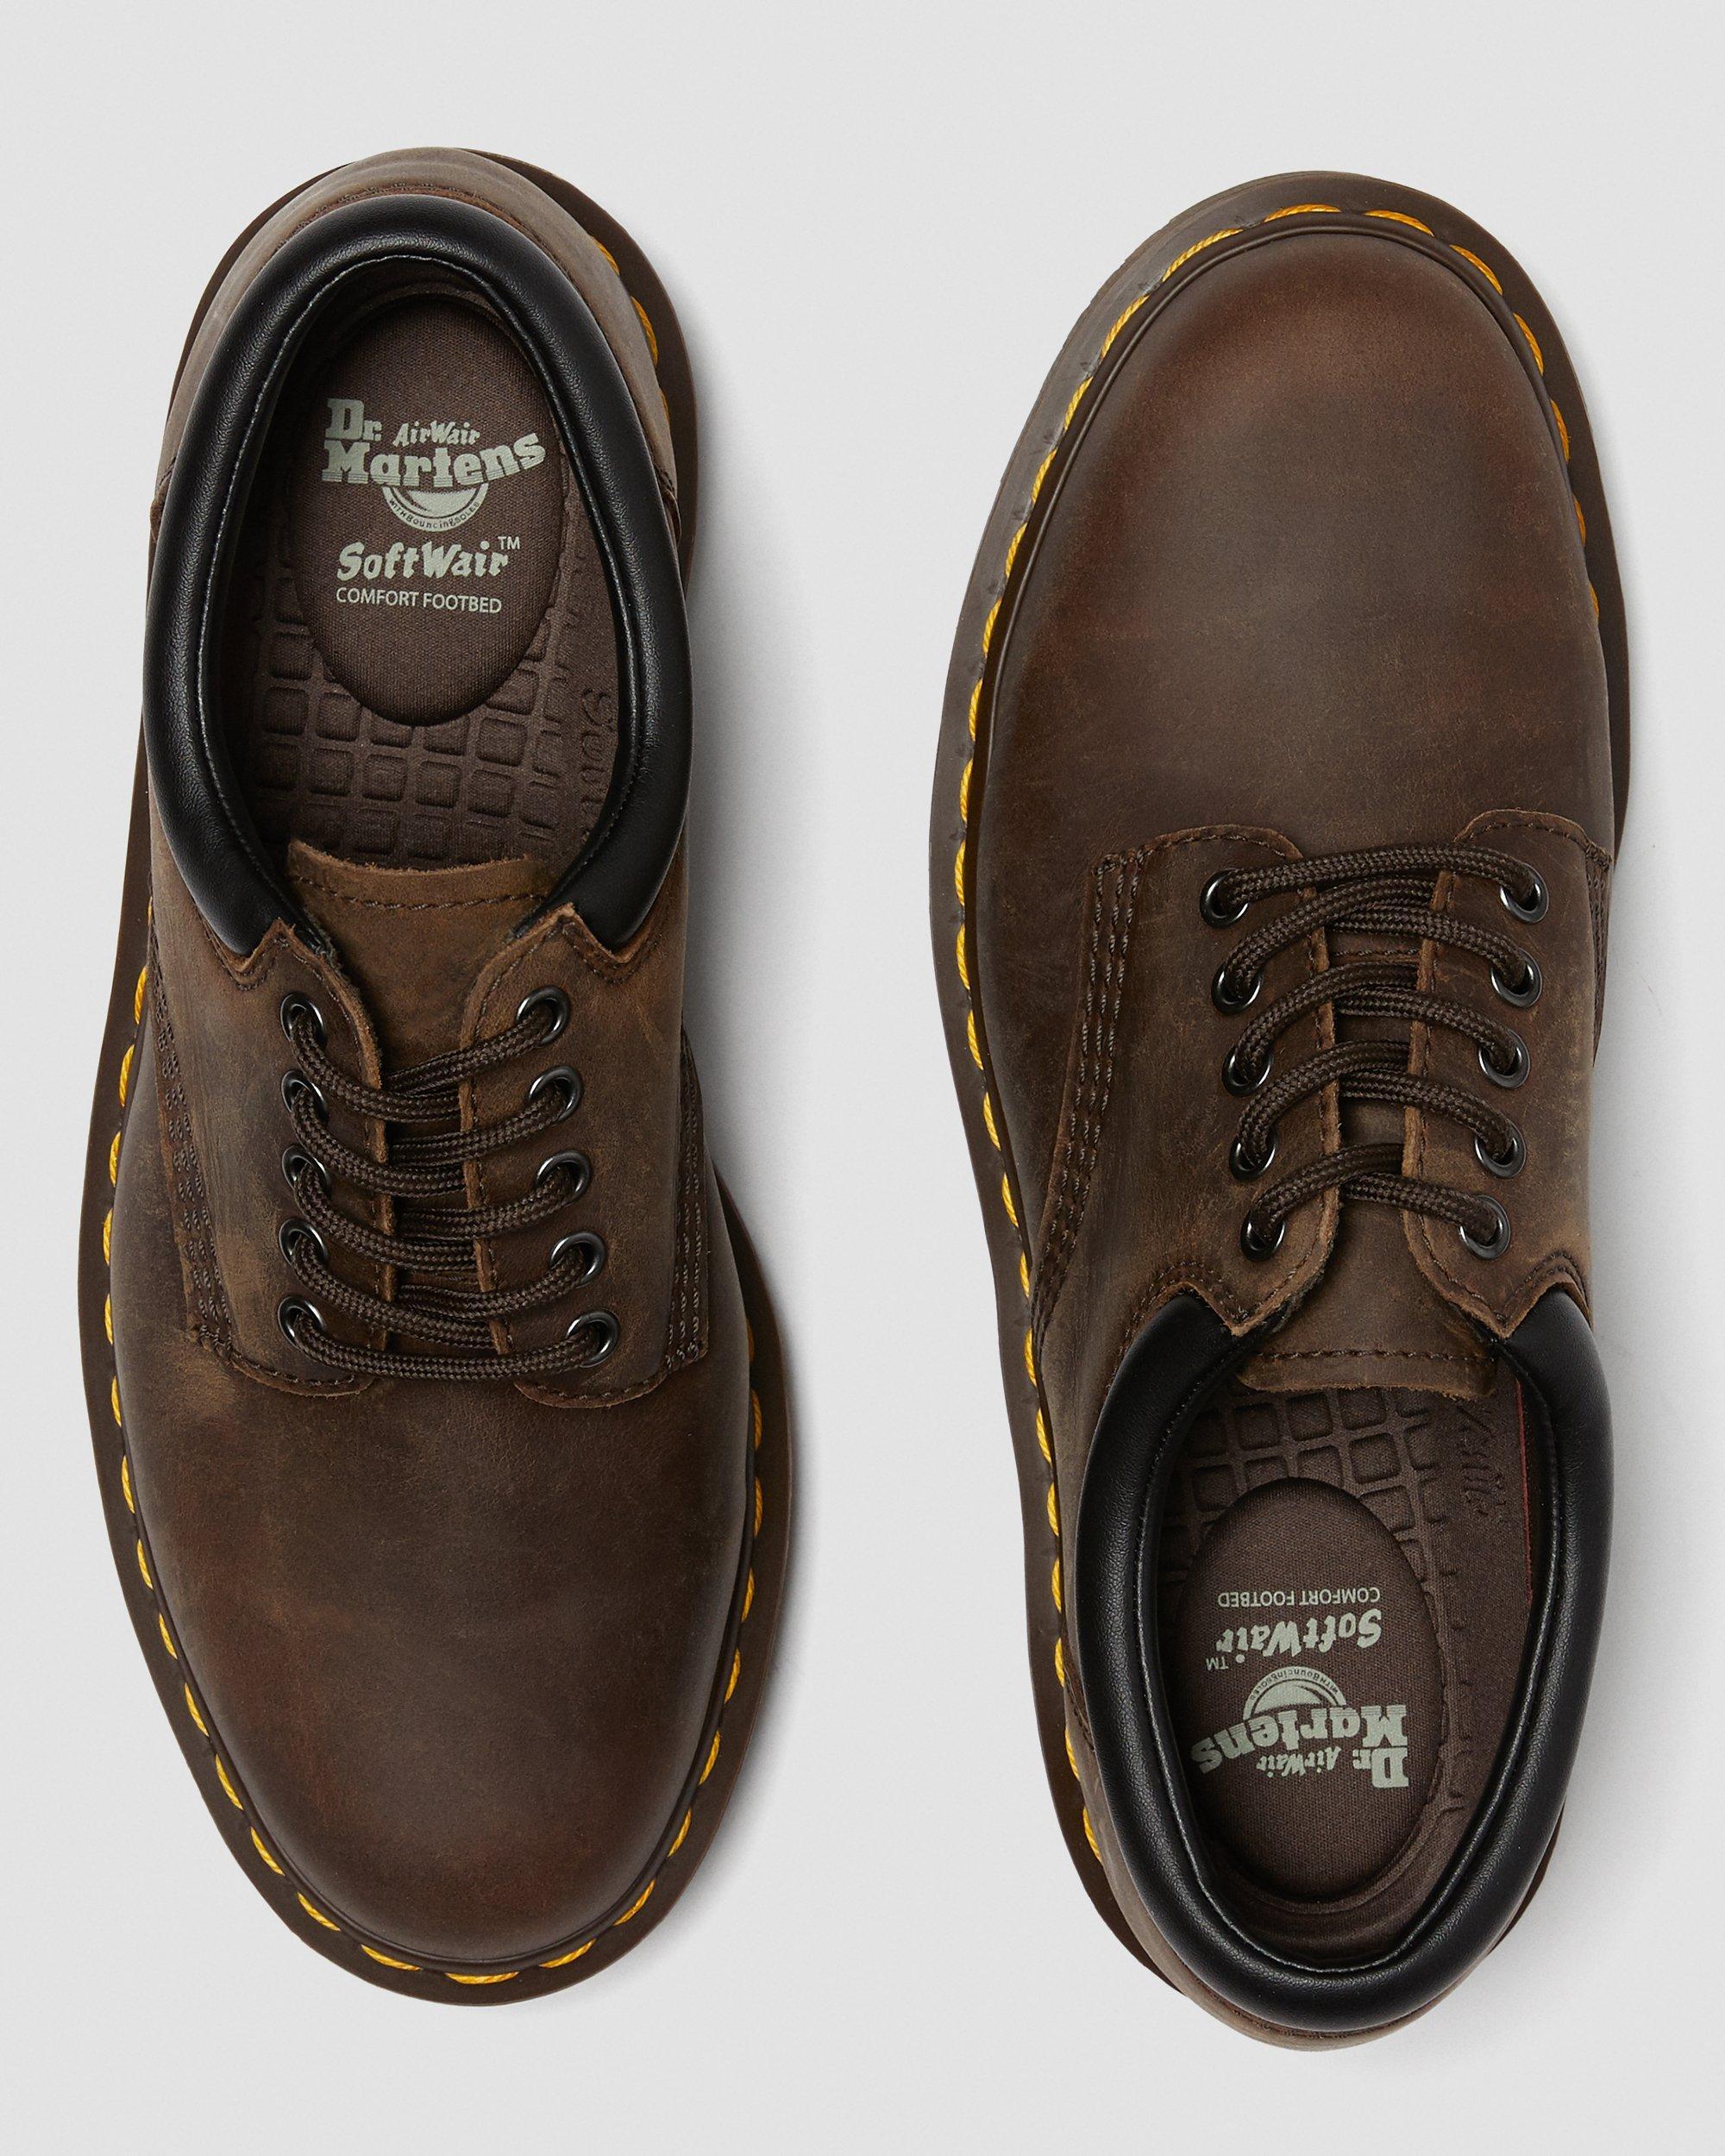 Dr. Martens 8053 Slip Resistant Crazy Horse Leather Casual Shoes in ...